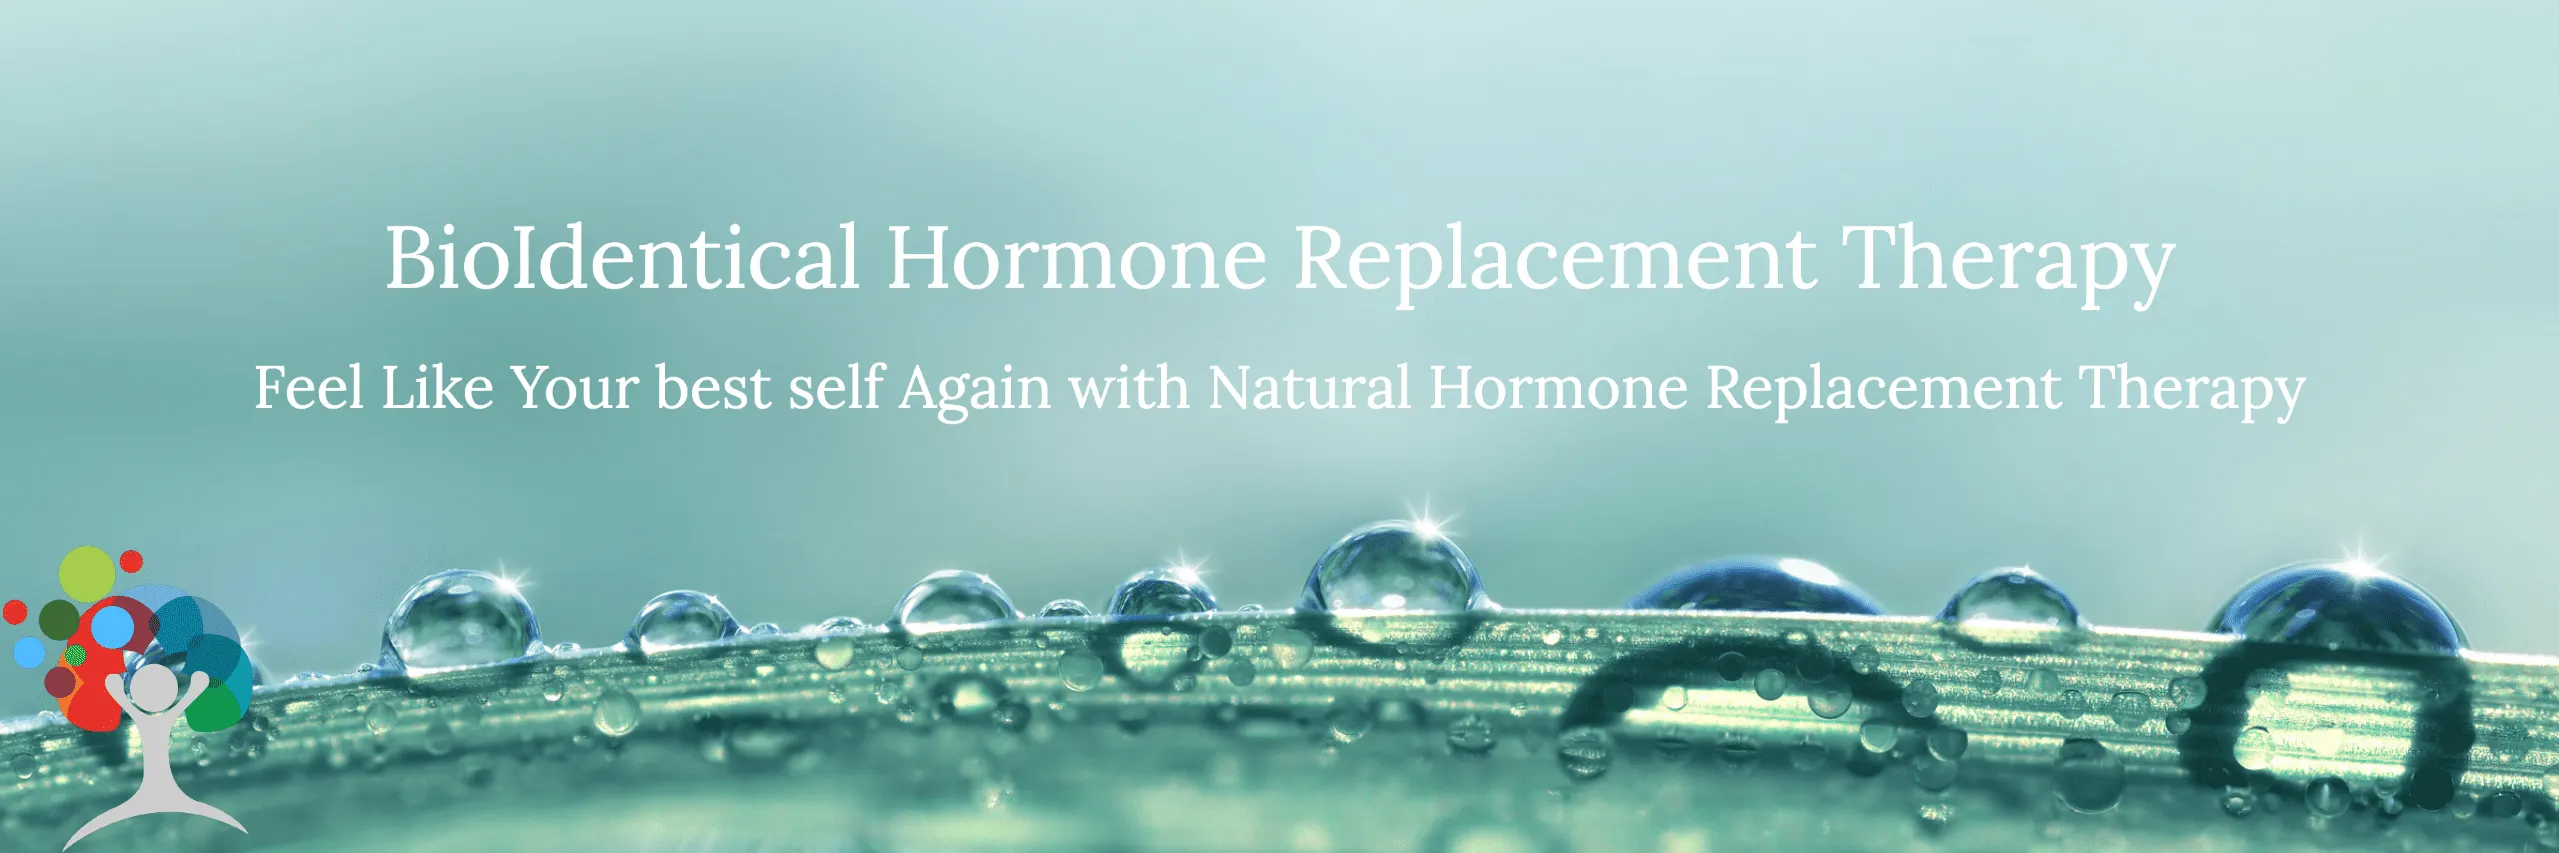 Bioidentical hormone replacement therapy.